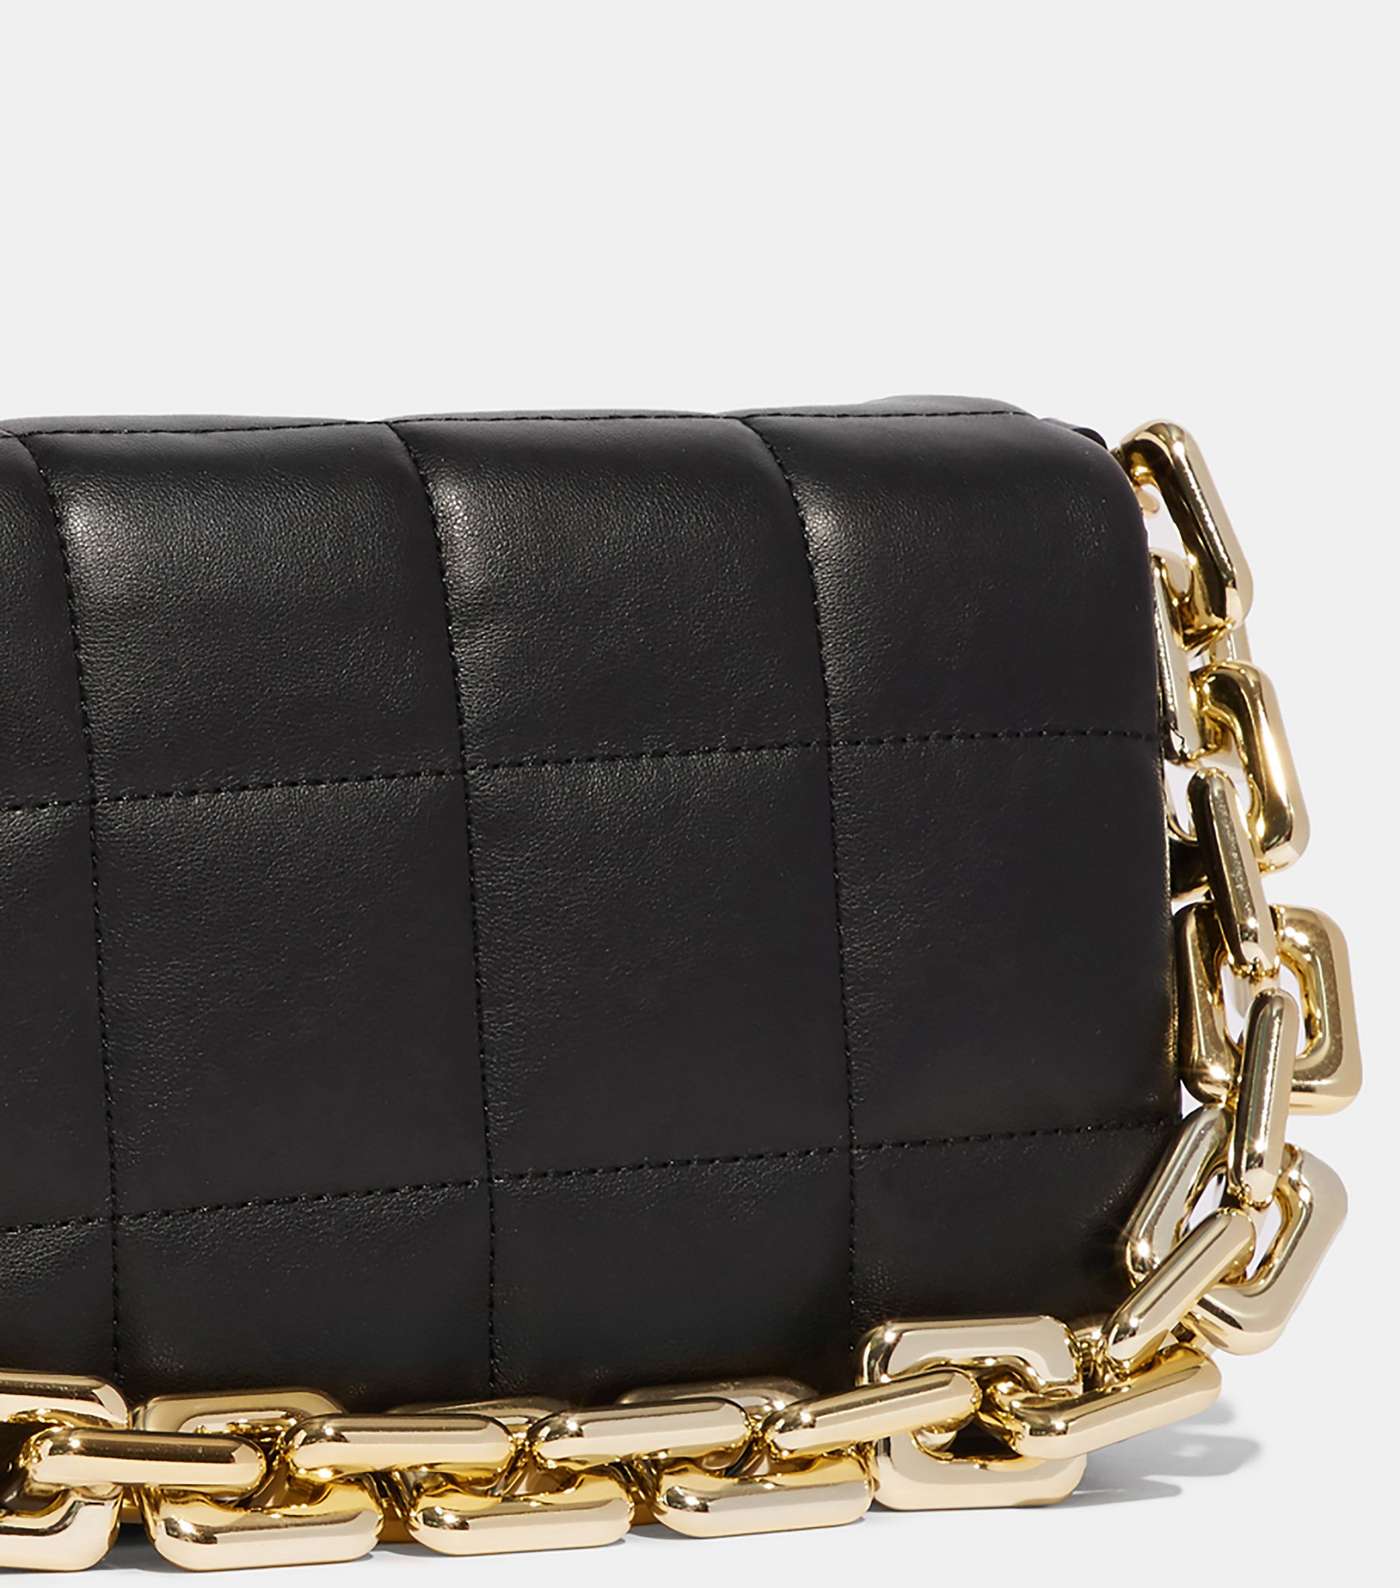 Skinnydip Black Leather-Look Quilted Chain Shoulder Bag Image 3